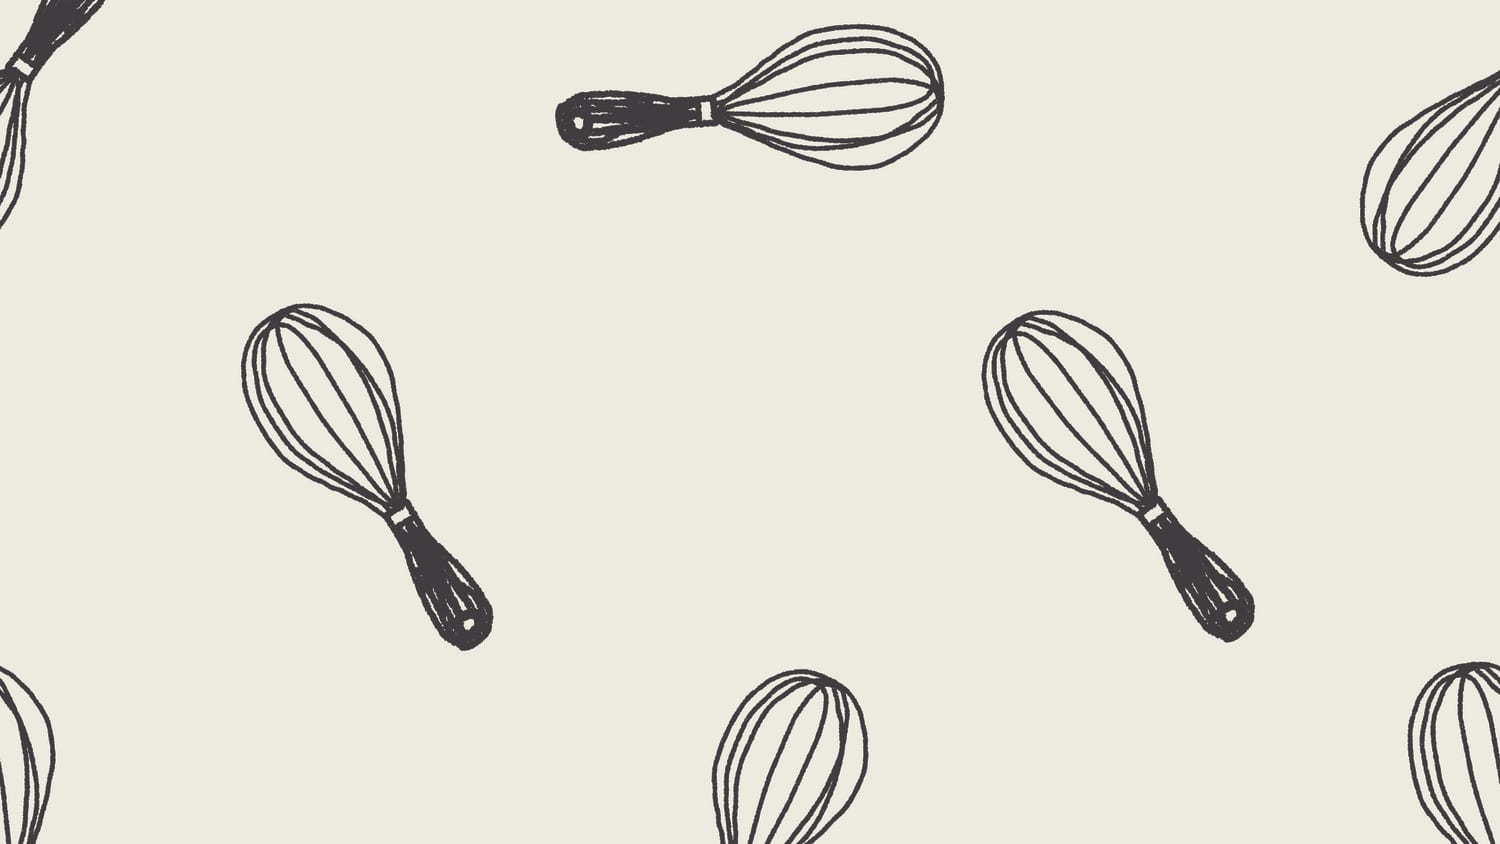 A Mini Whisk is Better Than a Giant One—Prove Me Wrong